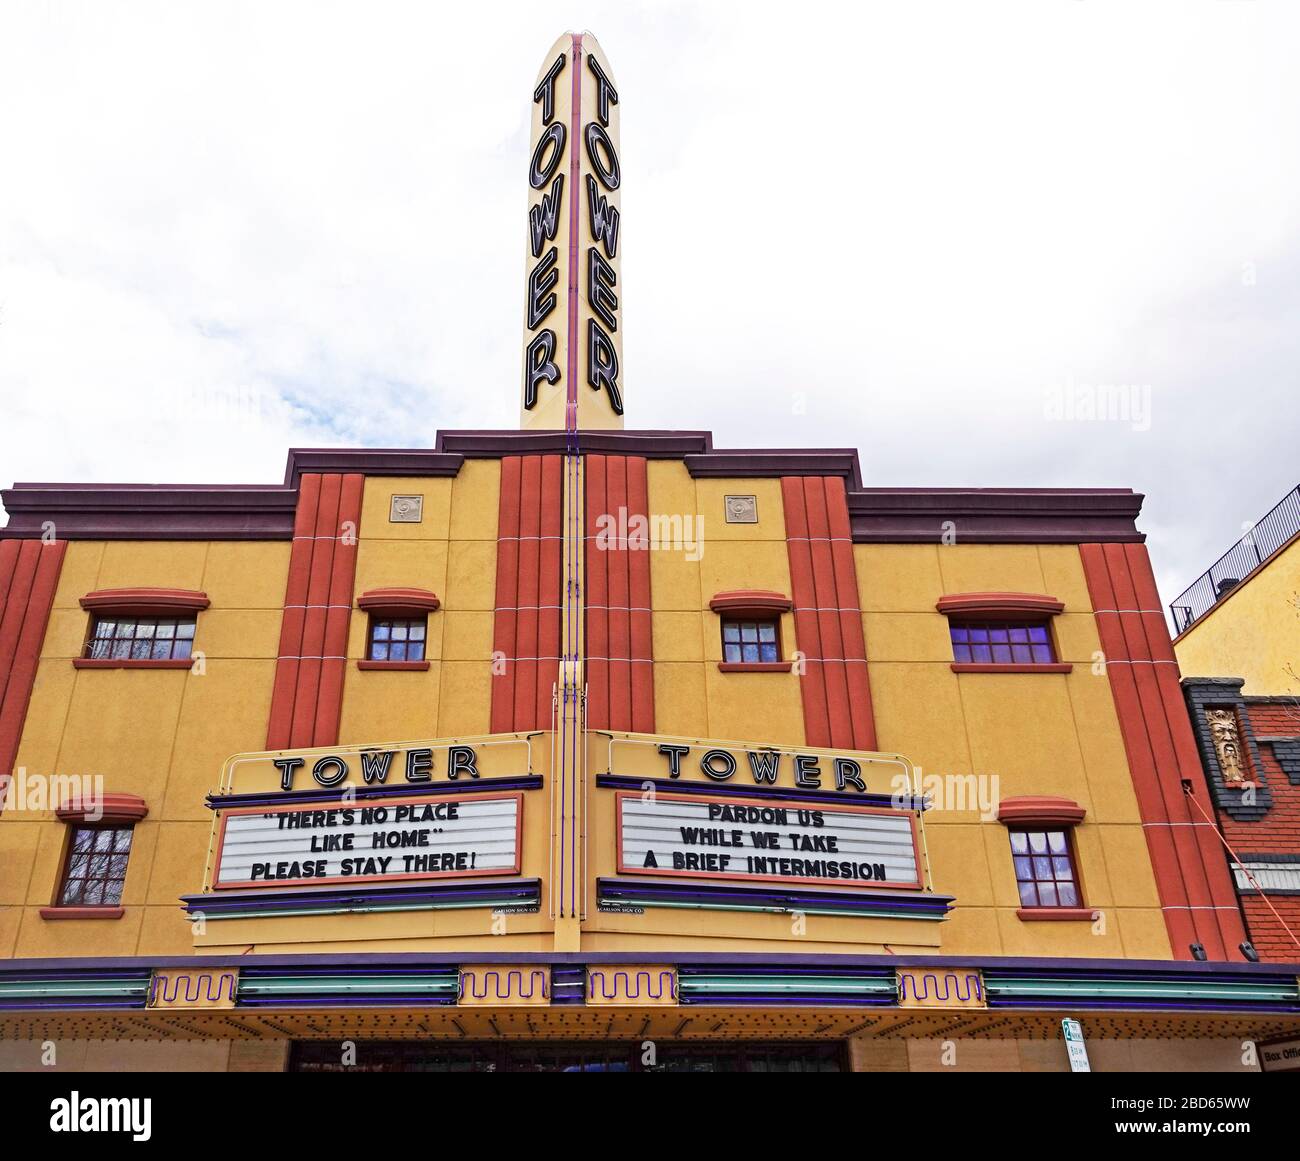 The event venue Tower Theater in Bend, Oregon, displaying 'Stay Home' signs during the Coronavirus pandemic of 2020. Stock Photo